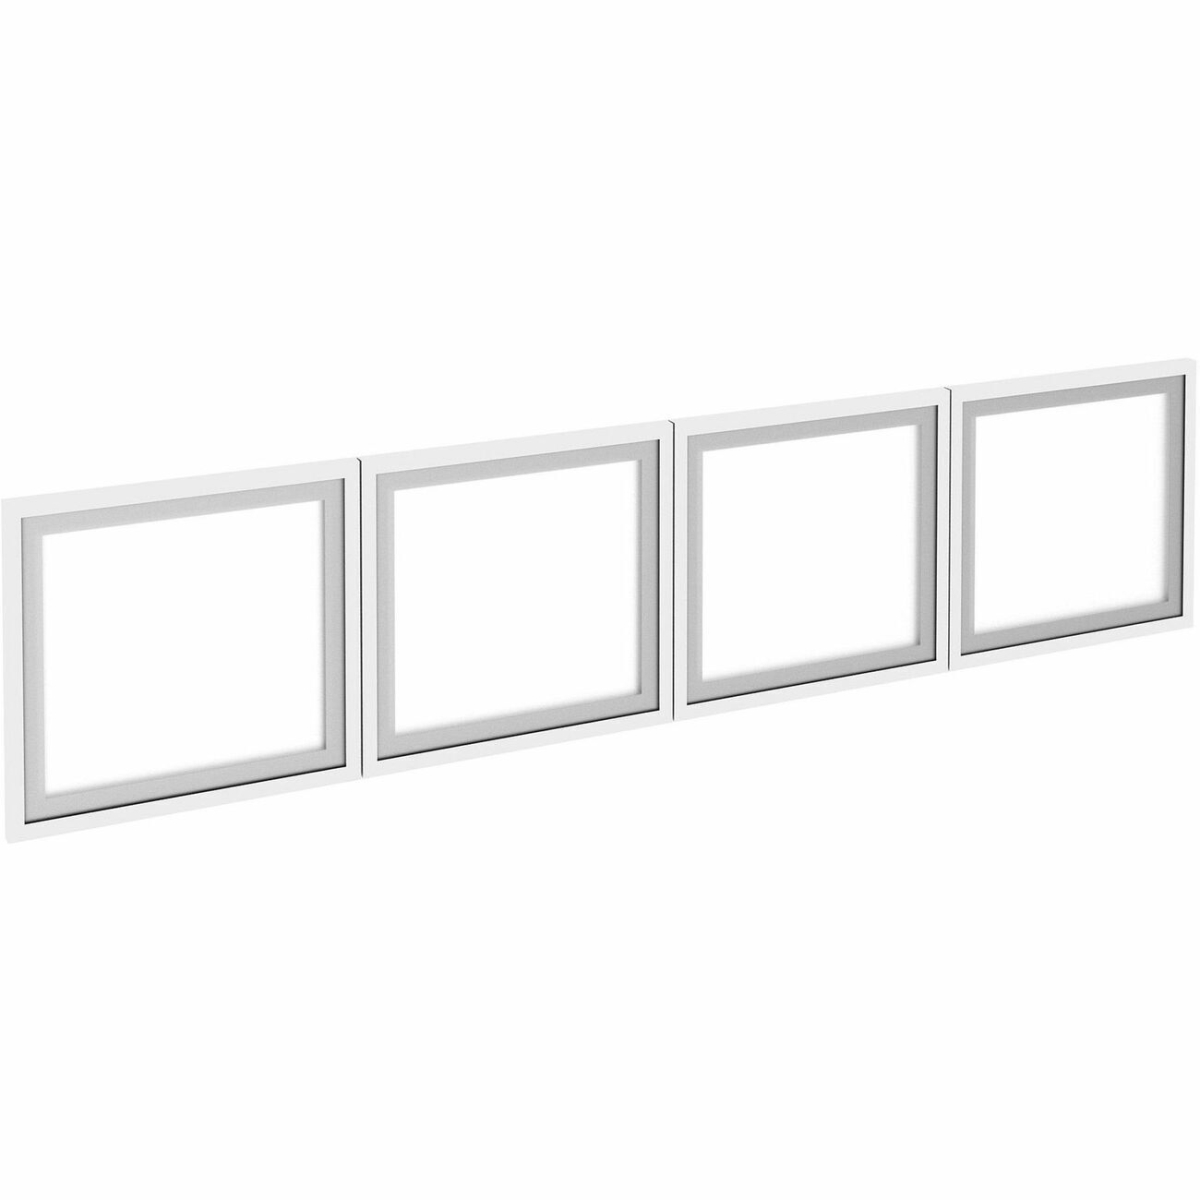 Picture of Lorell LLR59713 Wall-Mount Hutch Frosted Glass Door - Pack of 4